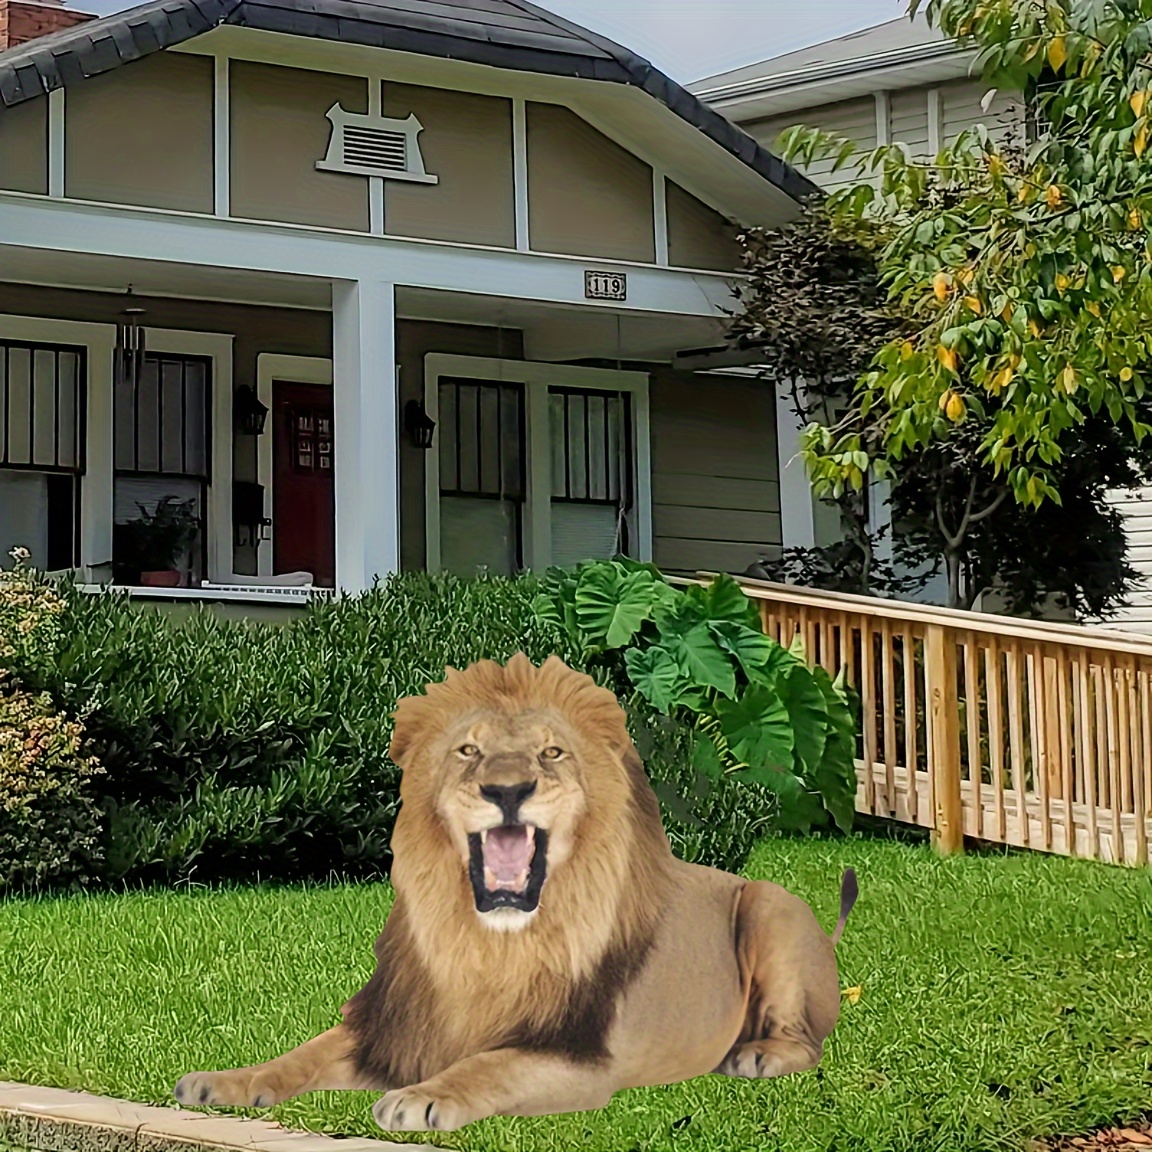 

Art Deco 1pc Lion Garden Stake, Easter Outdoor Decor, Animal Theme Acrylic Colorful 2d Print, Floor Mount Yard Art Statue For Garden Decoration - No Electricity Or Battery Needed